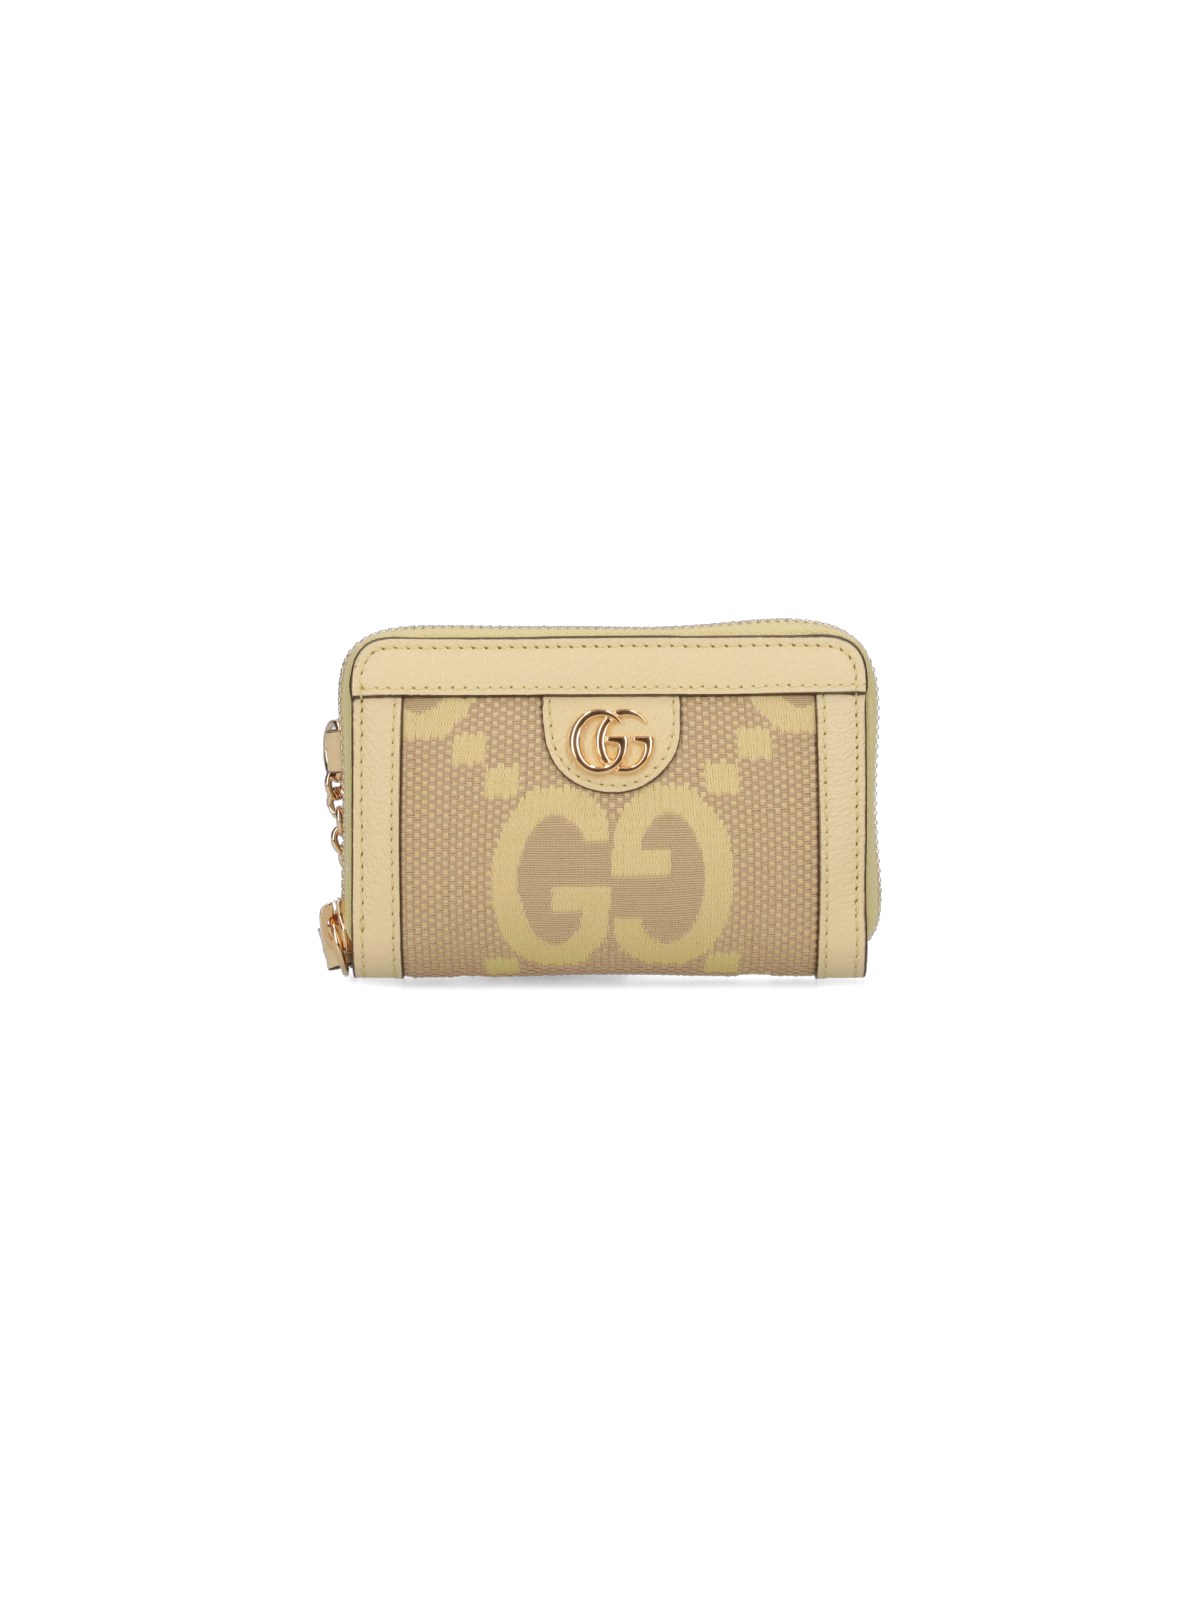 Gucci "ophidia Jumbo" Wallet In Yellow